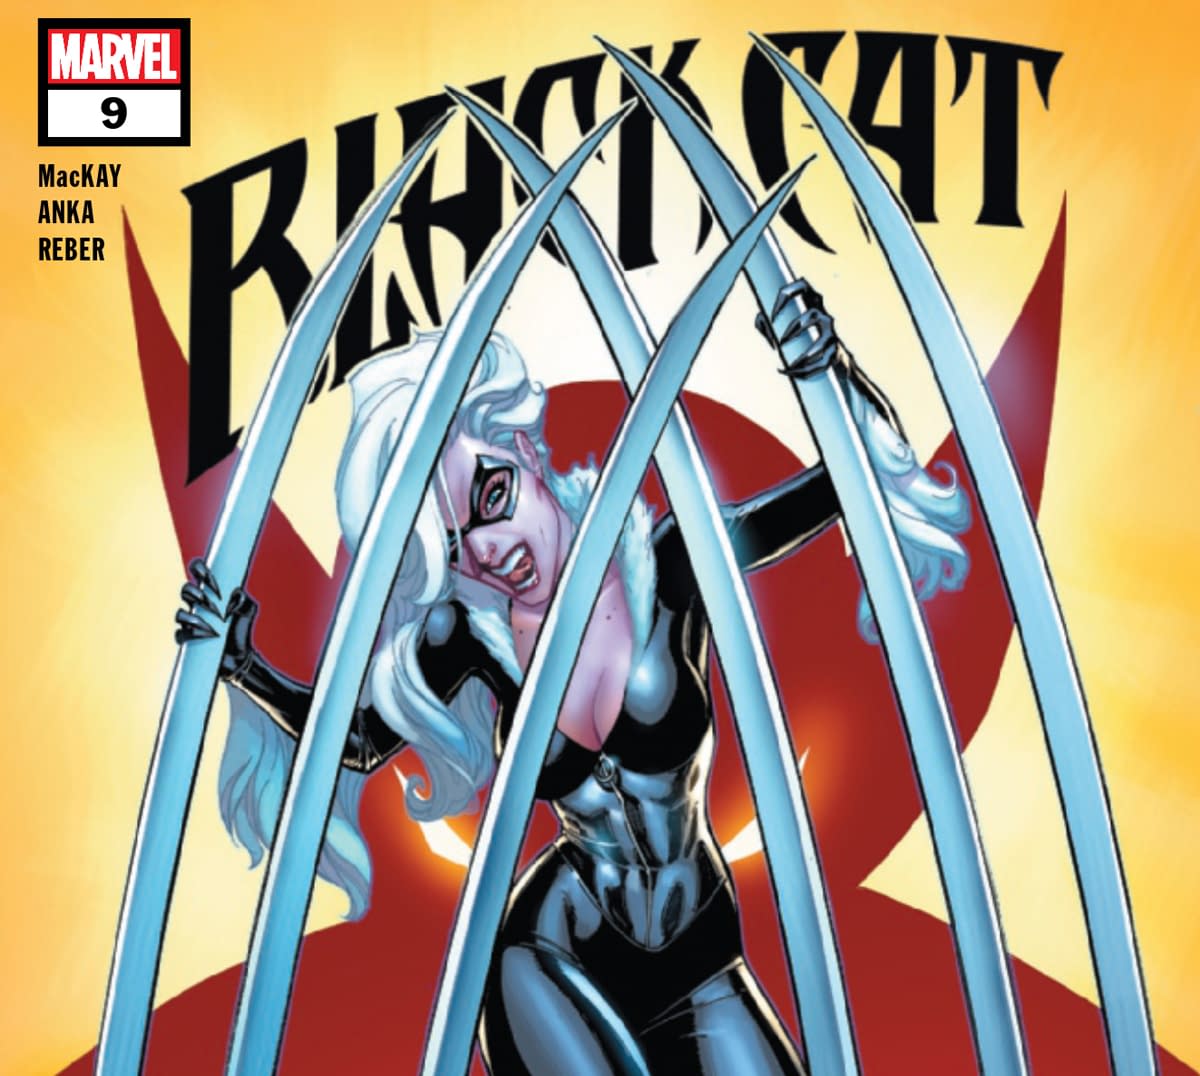 REVIEW: Black Cat #9 -- "Another Fascinating, Entertaining Adventure"